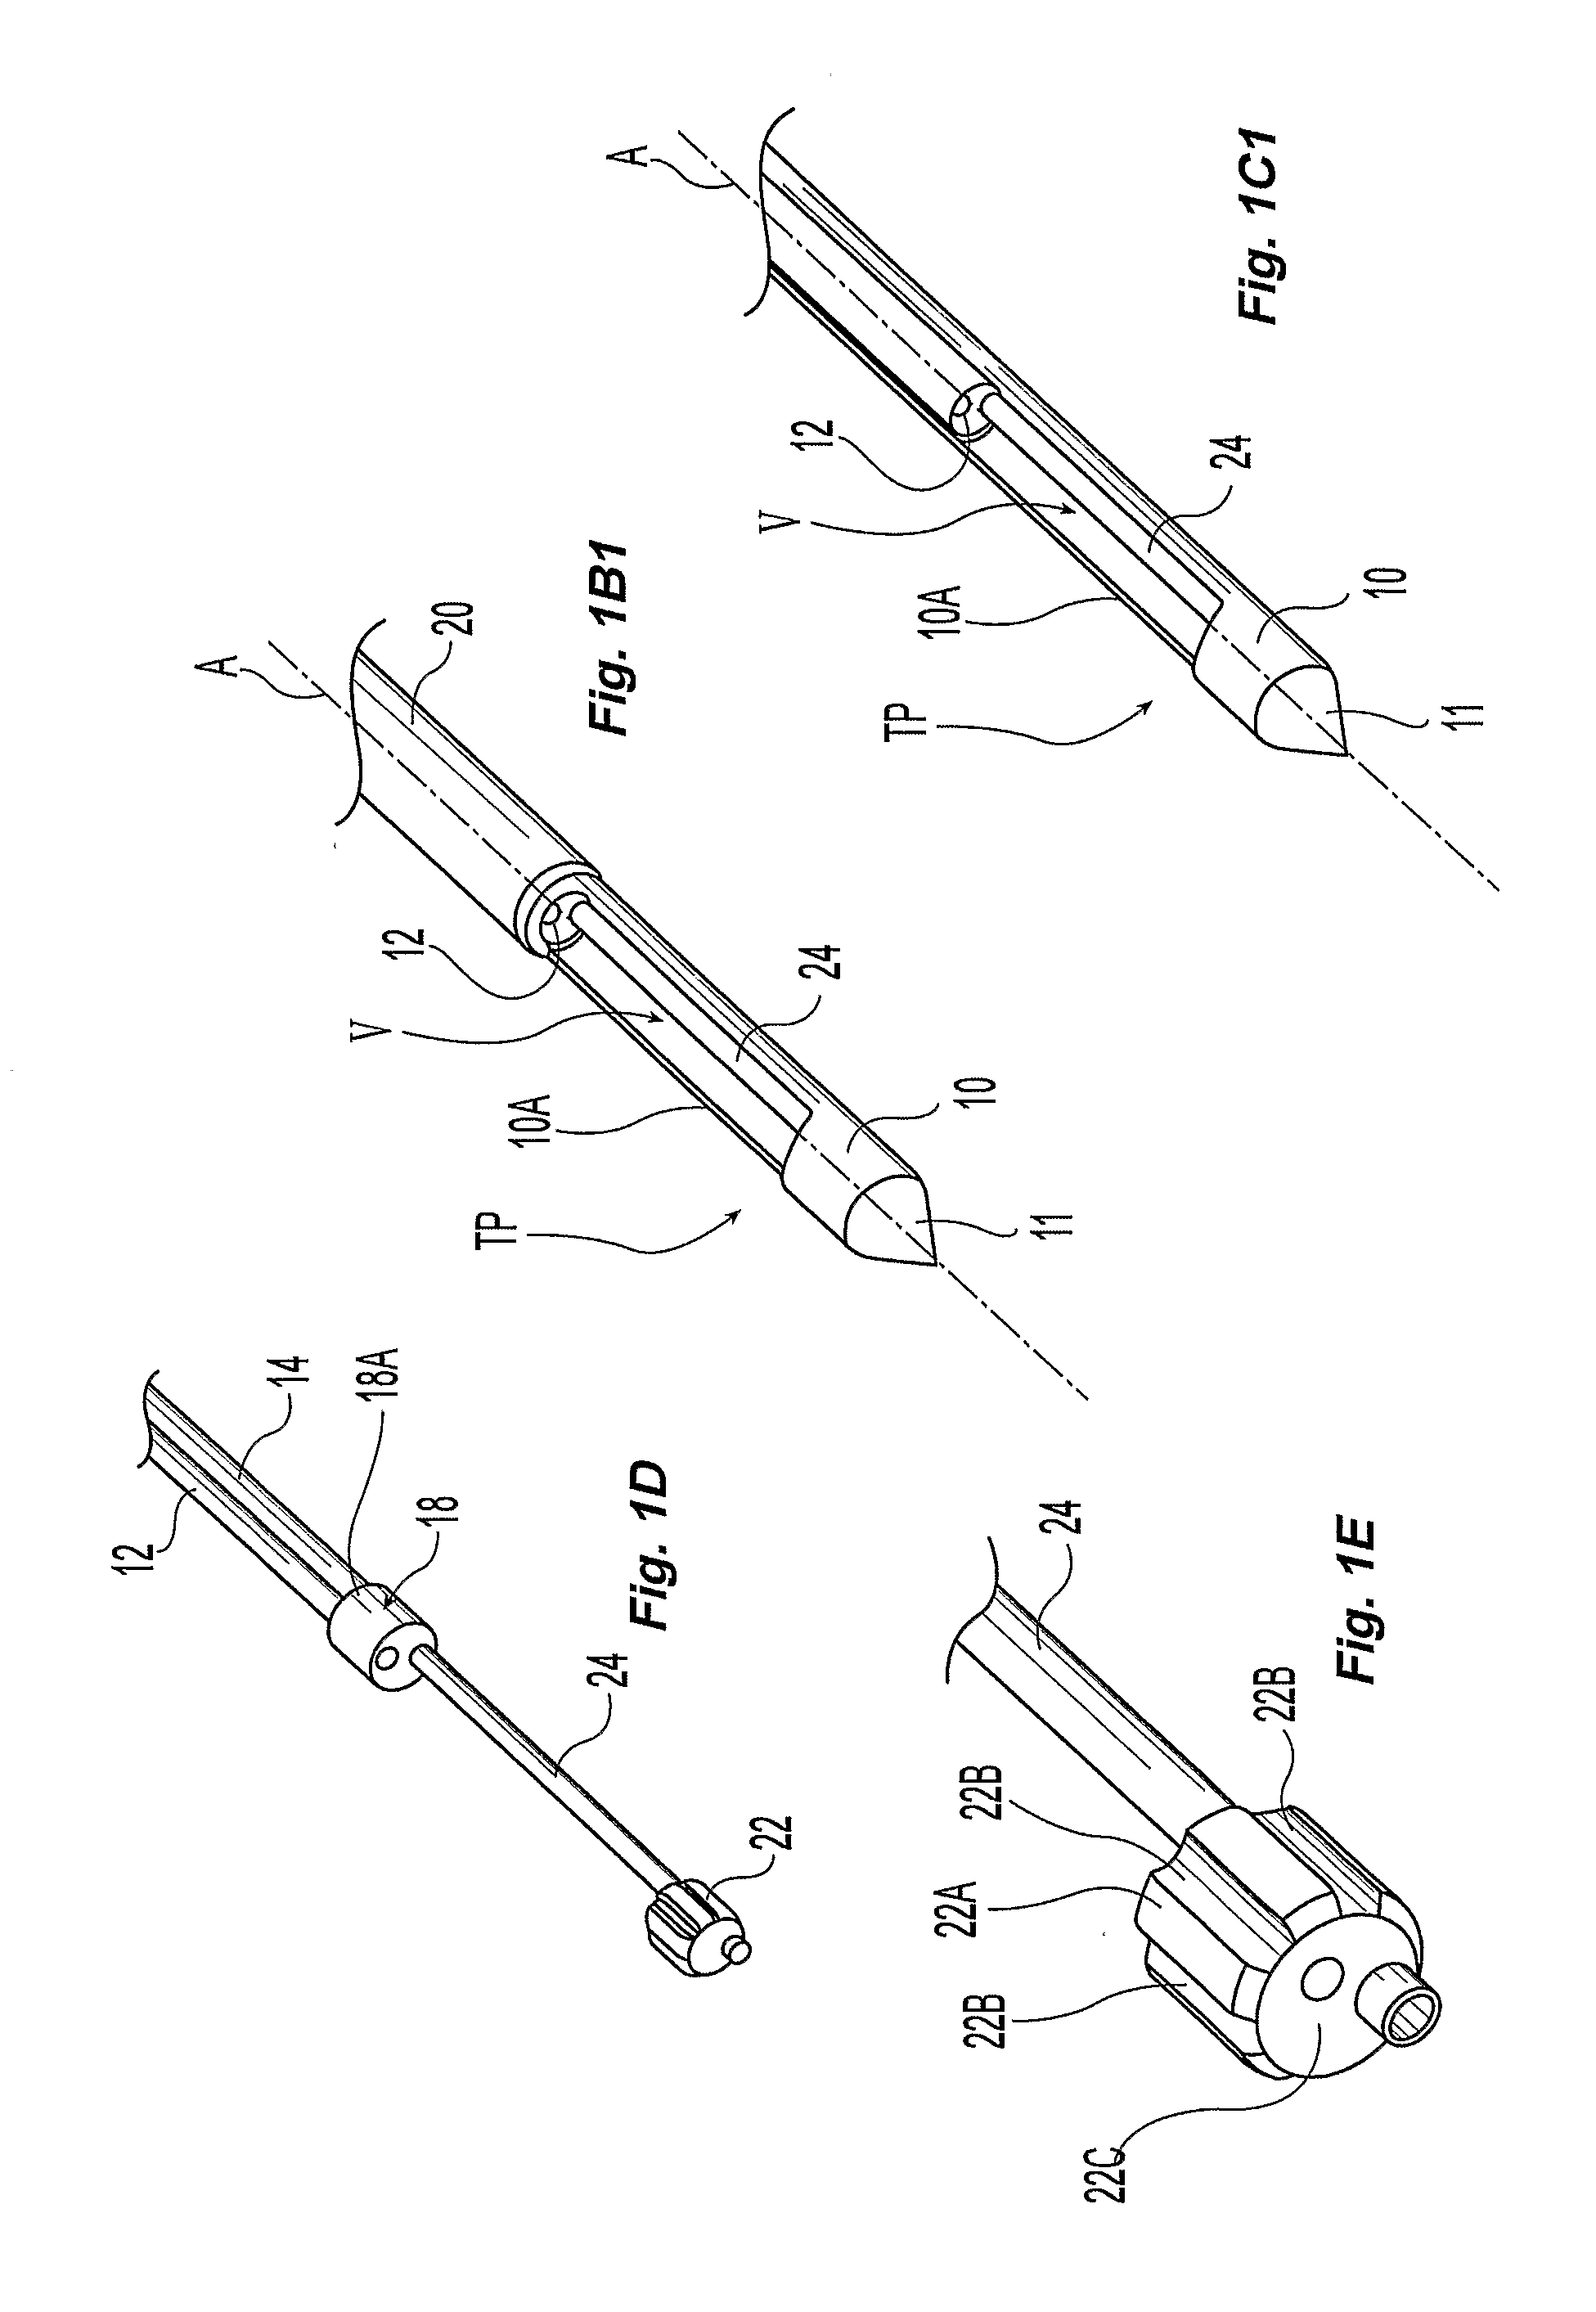 Single-Insertion, Multiple Sample Biopsy Device with Integrated Markers